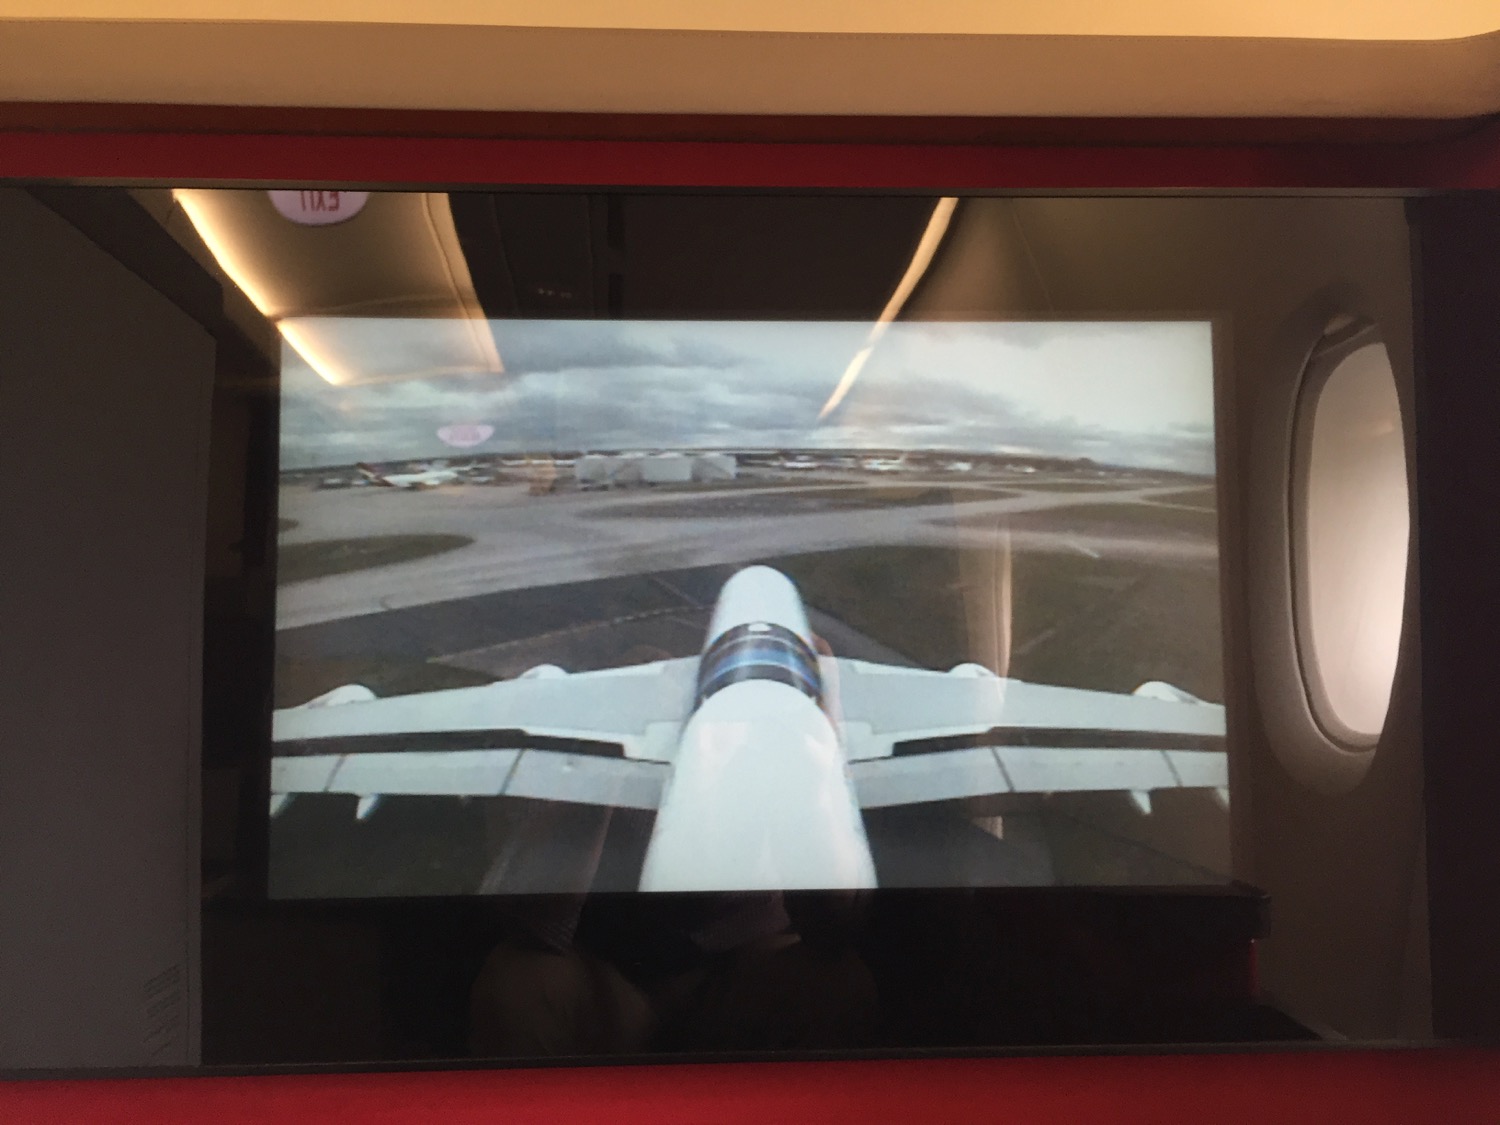 a screen with a plane on it